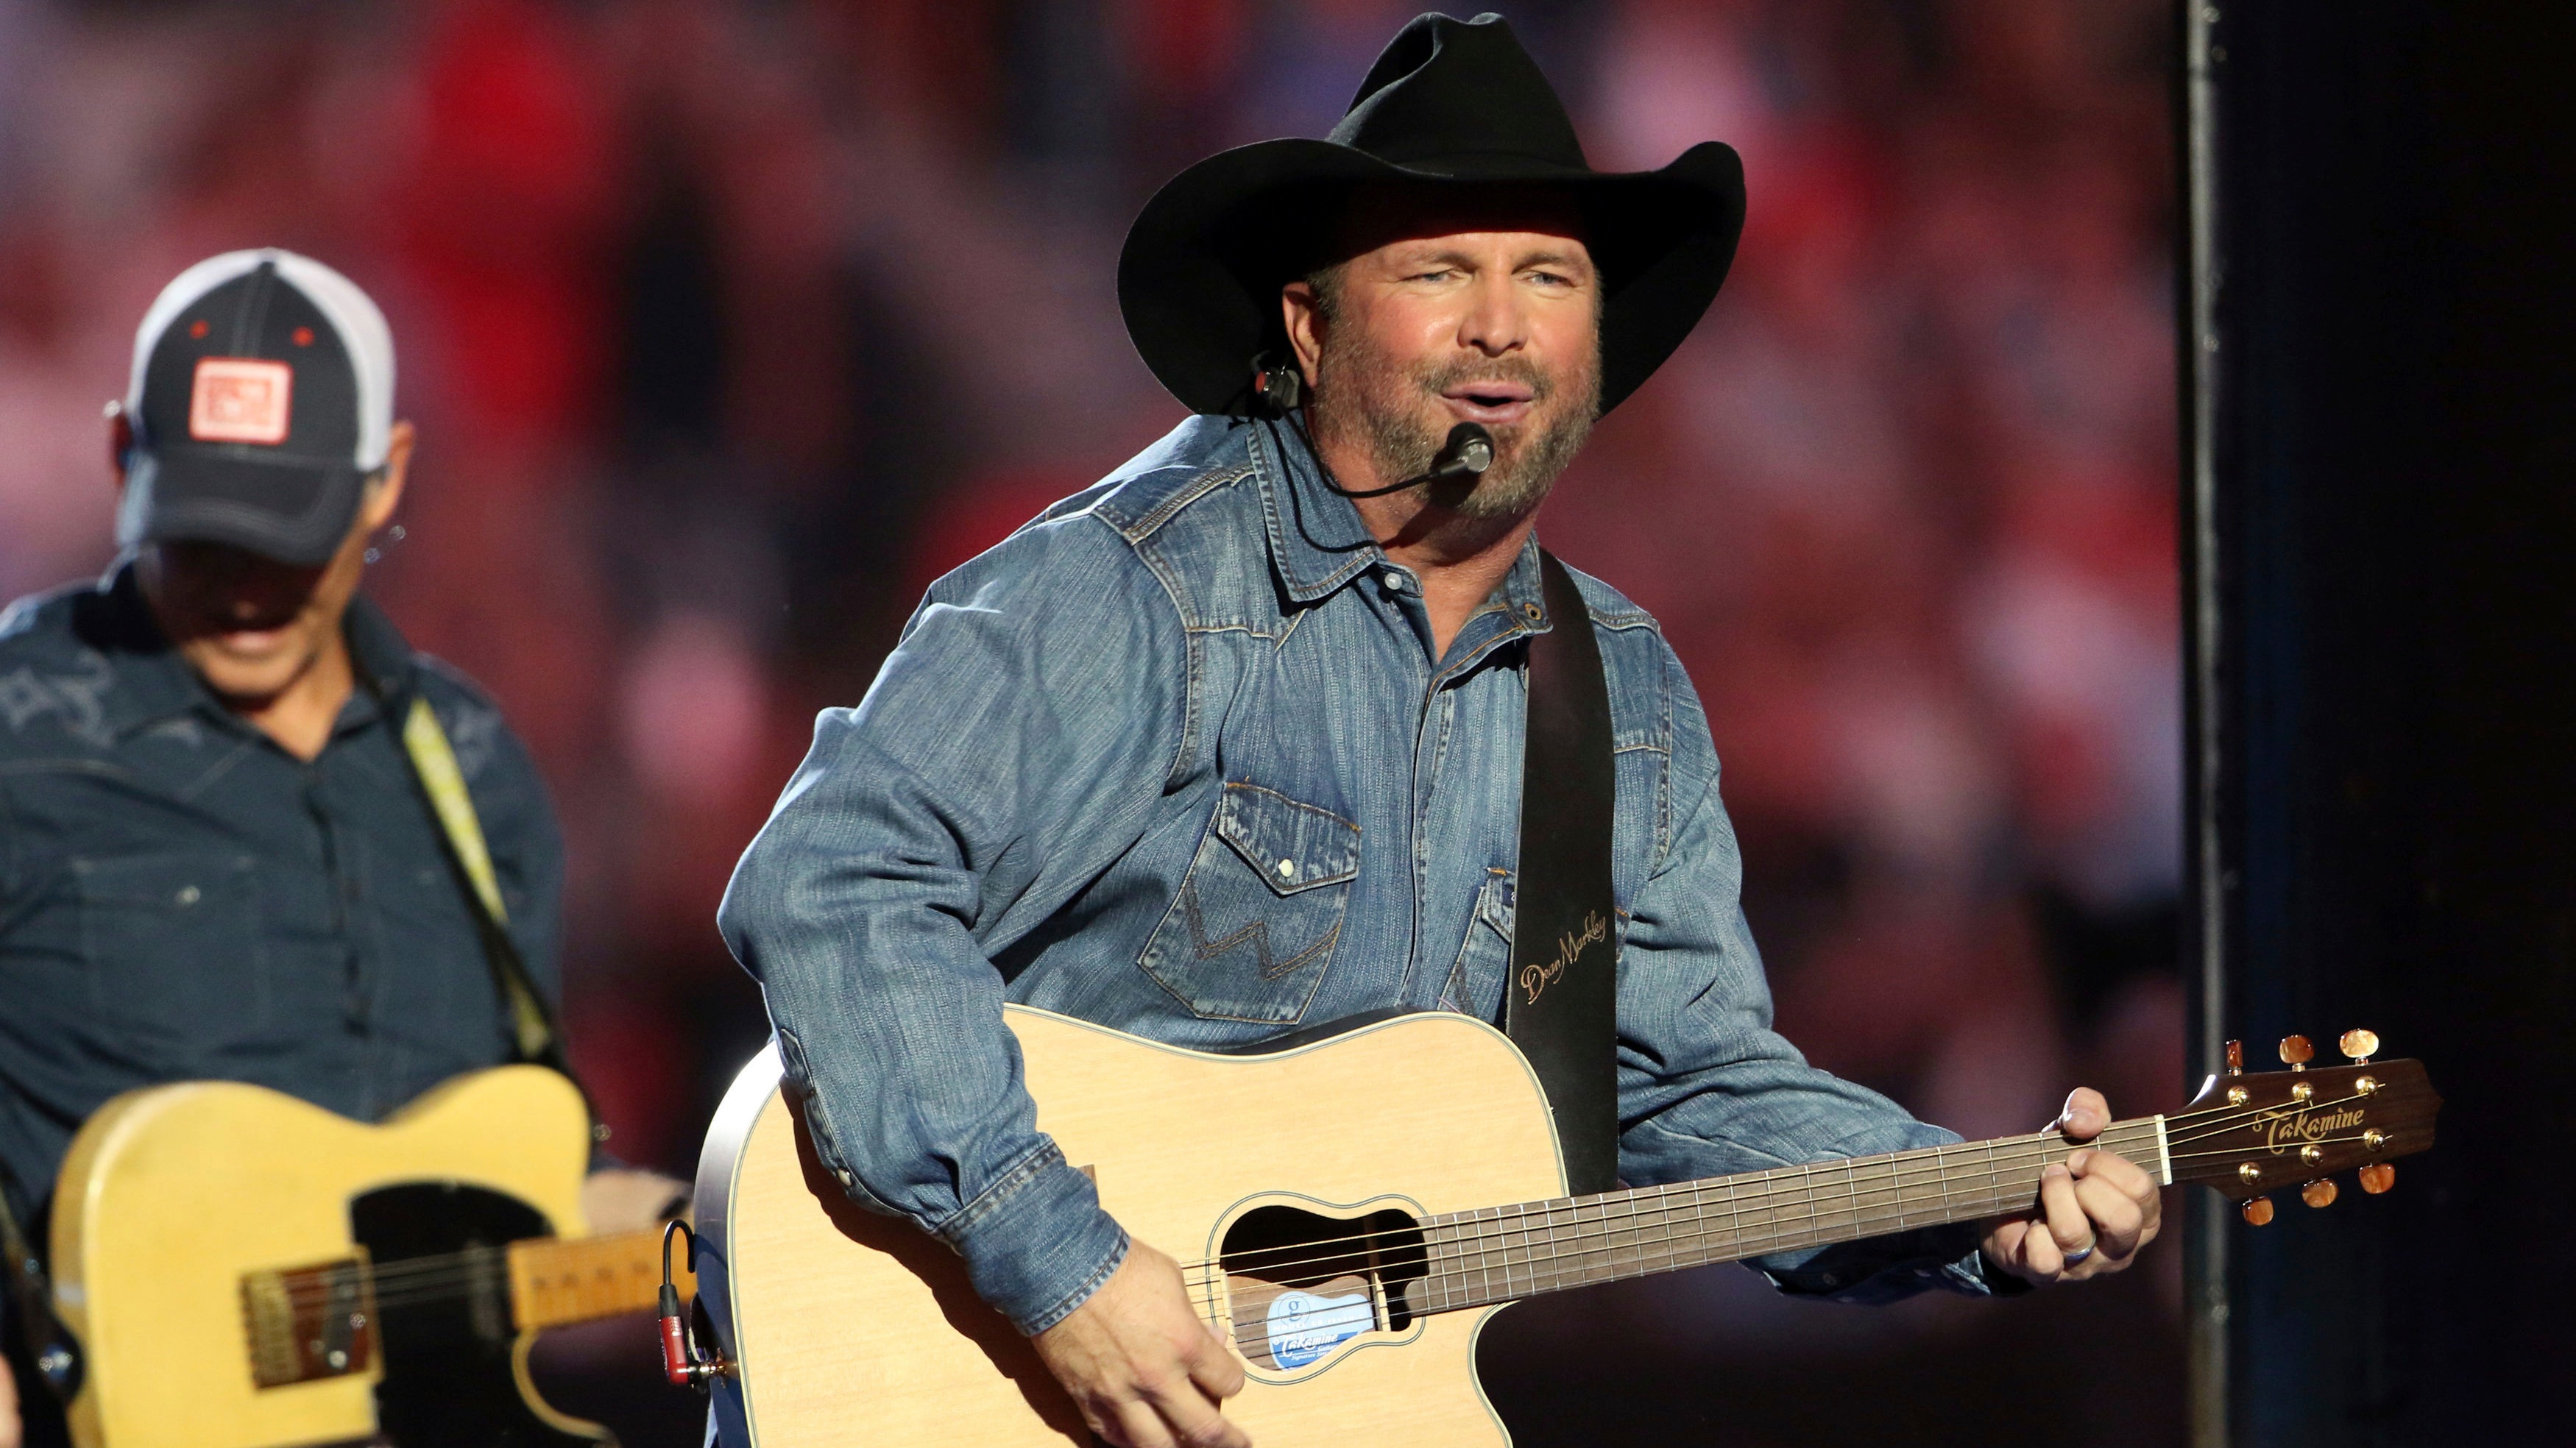 Garth Brooks to play first-ever concert at Notre Dame Stadium